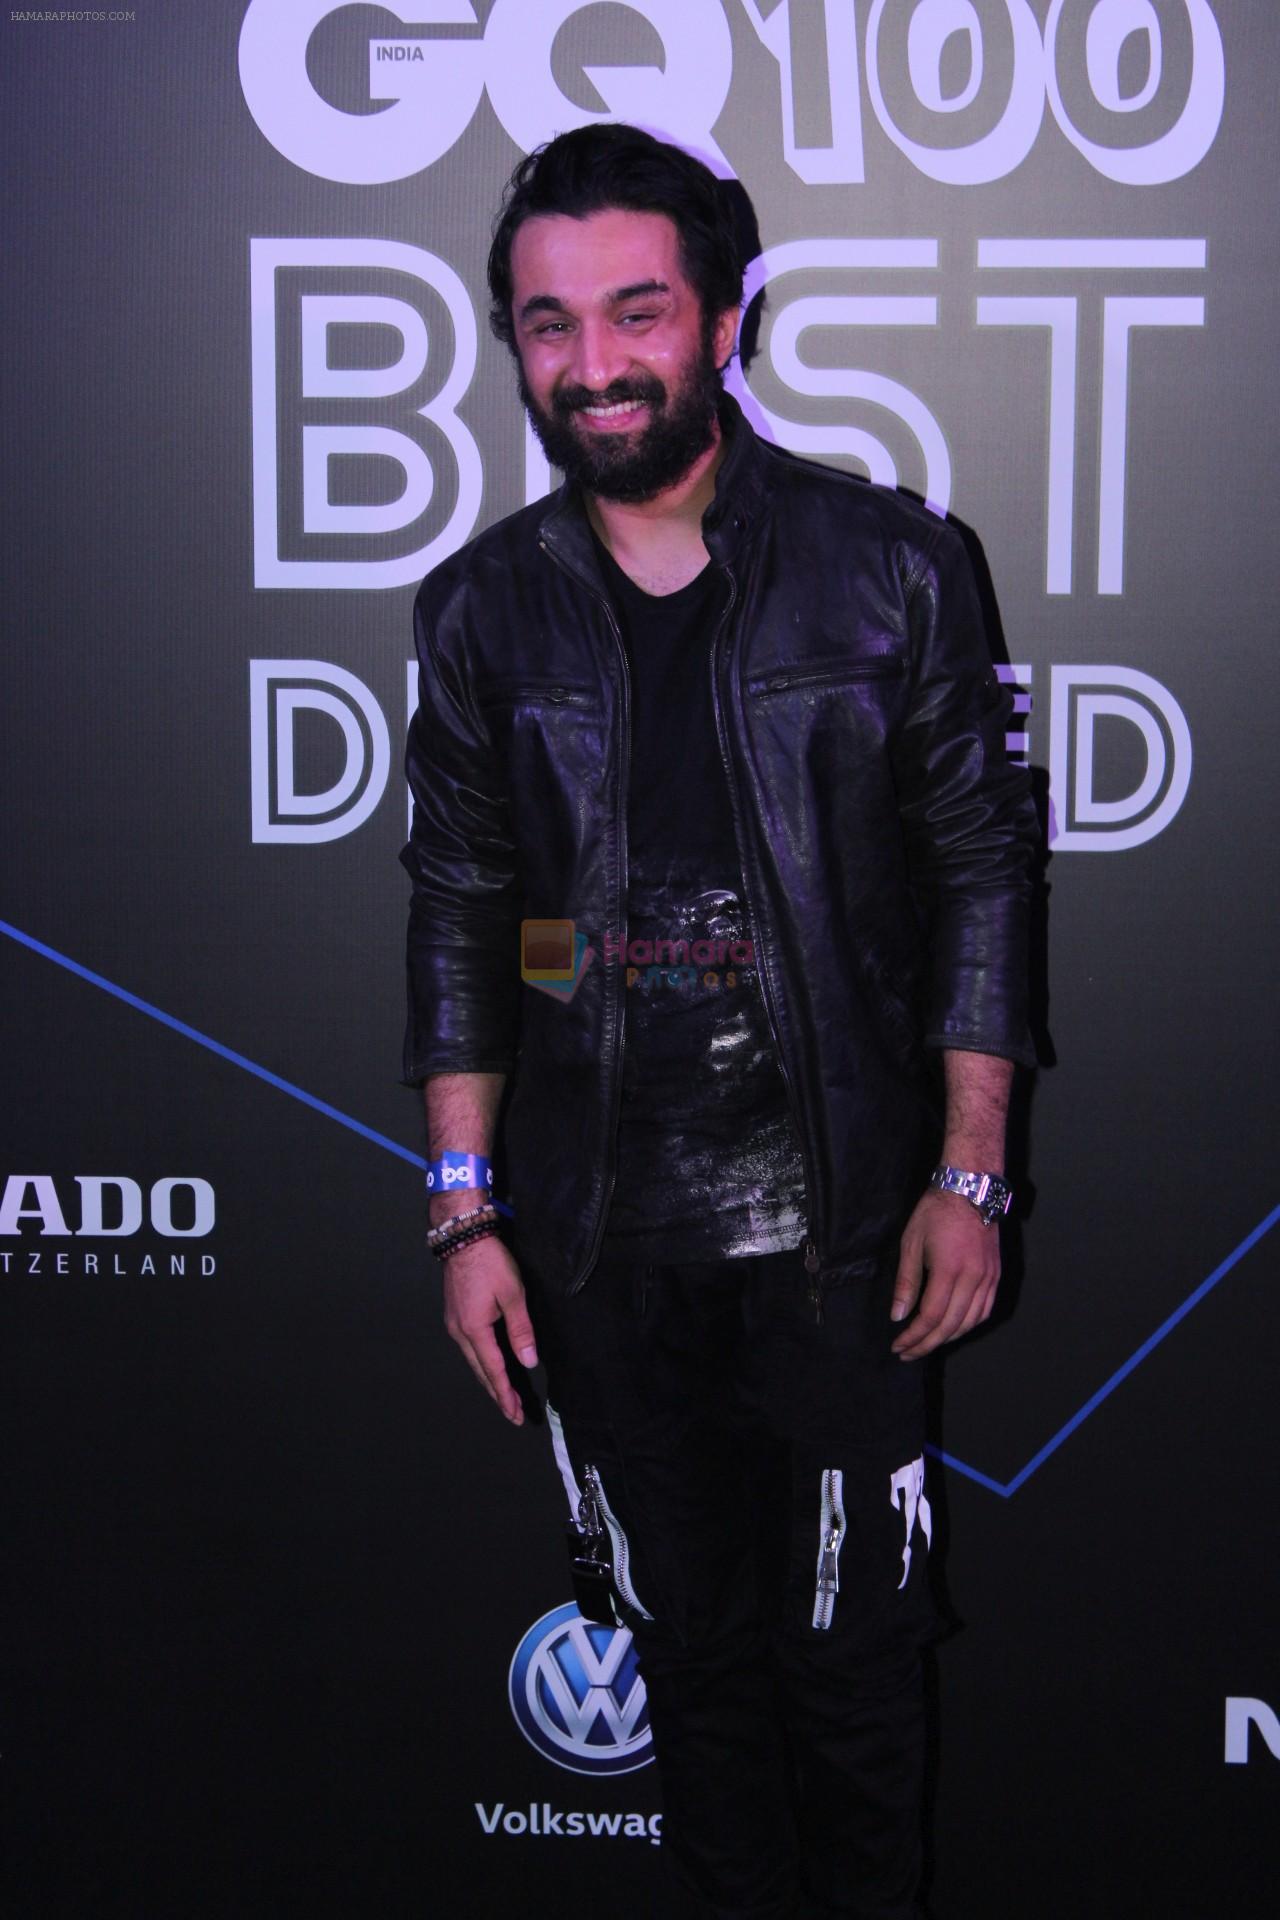 Siddhanth Kapoor at GQ 100 Best Dressed Awards 2019 on 2nd June 2019